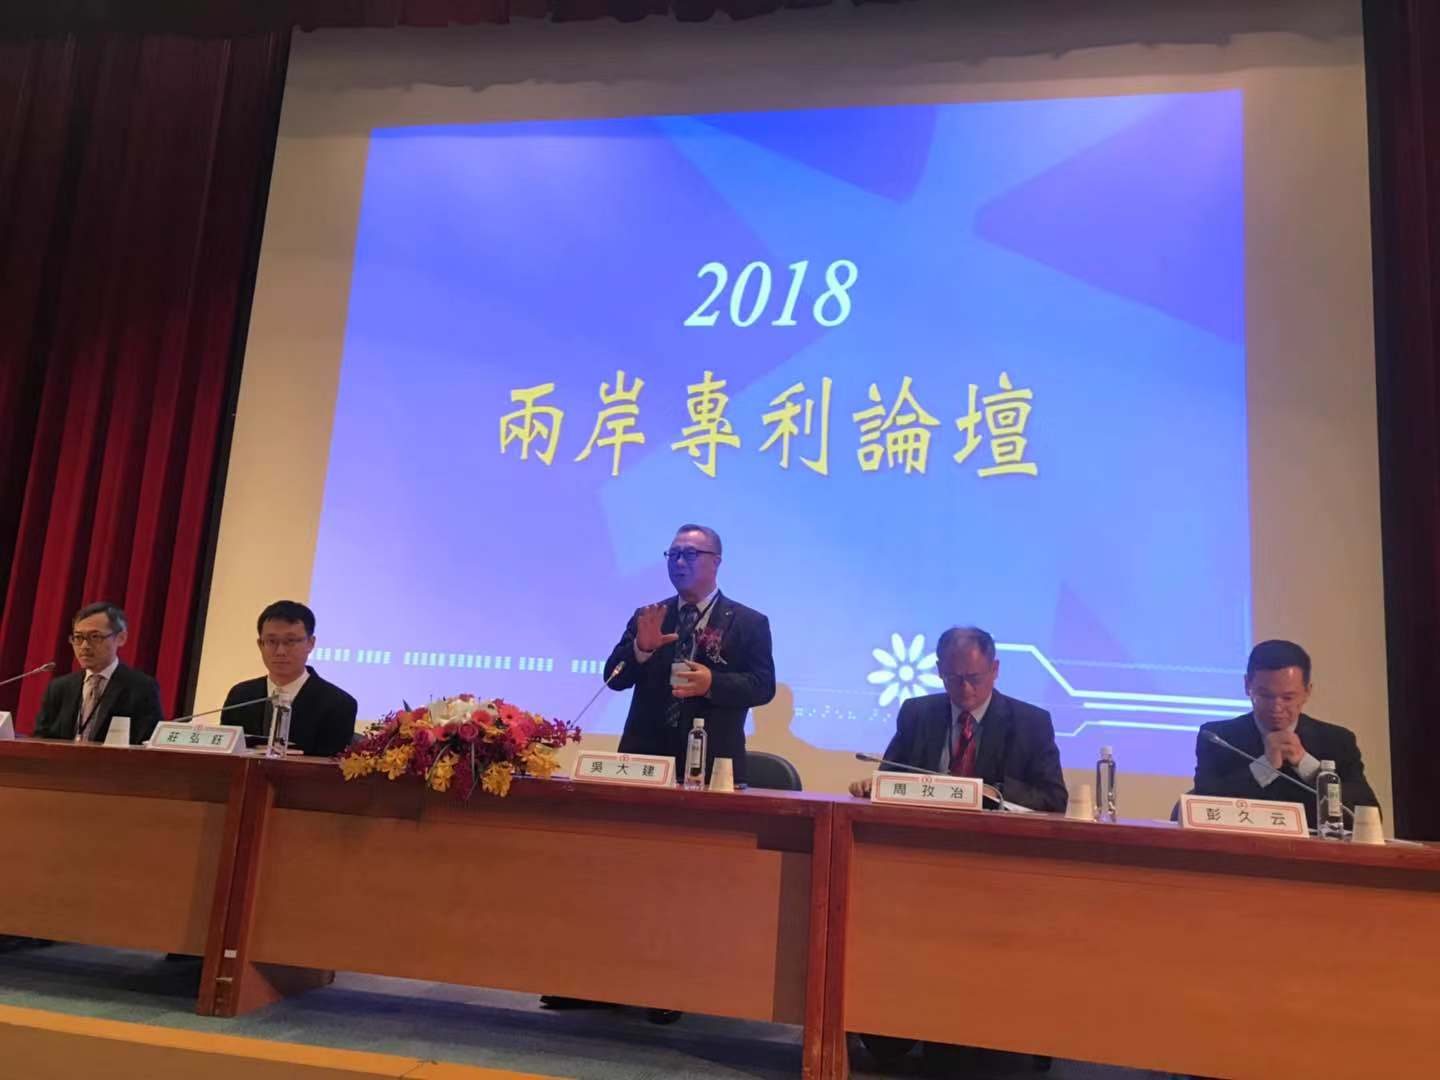 Mr. Dajian Wu hosted the 11th Cross-Strait Patent Forum